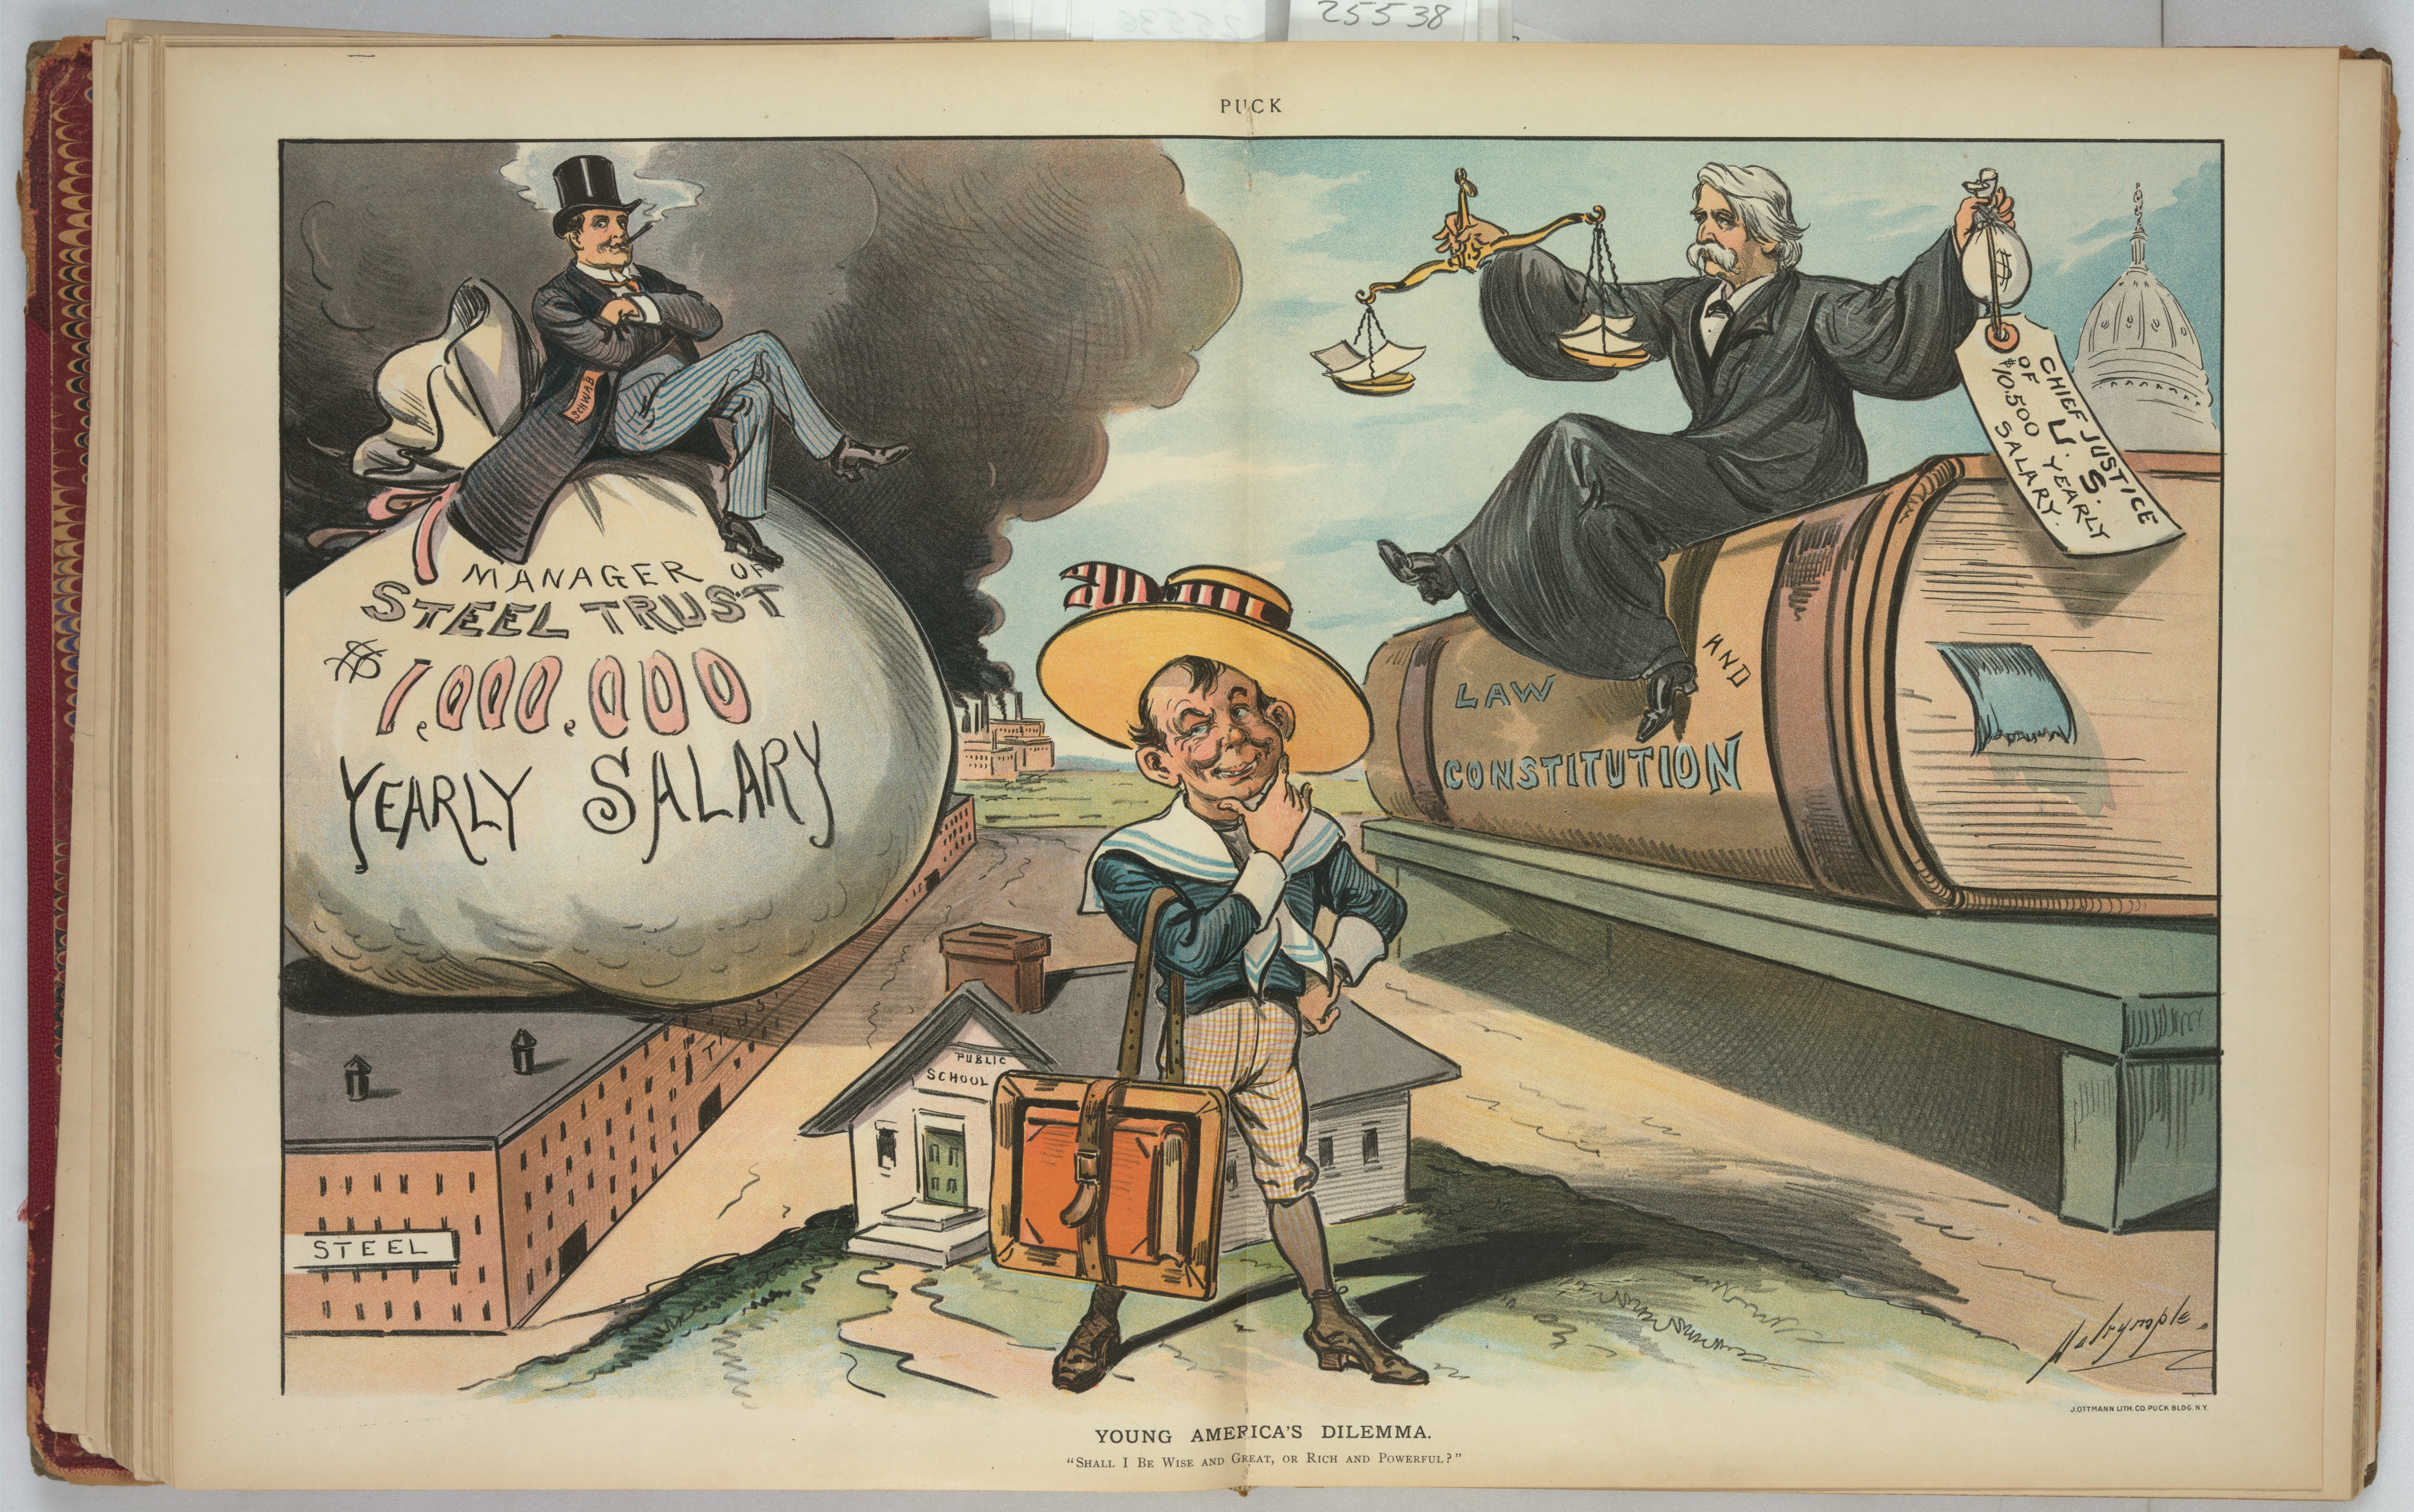 Young America's dilemma: Shall I be wise and great, or rich and powerful? (poster from 1901) This is an example of a [[false dilemma